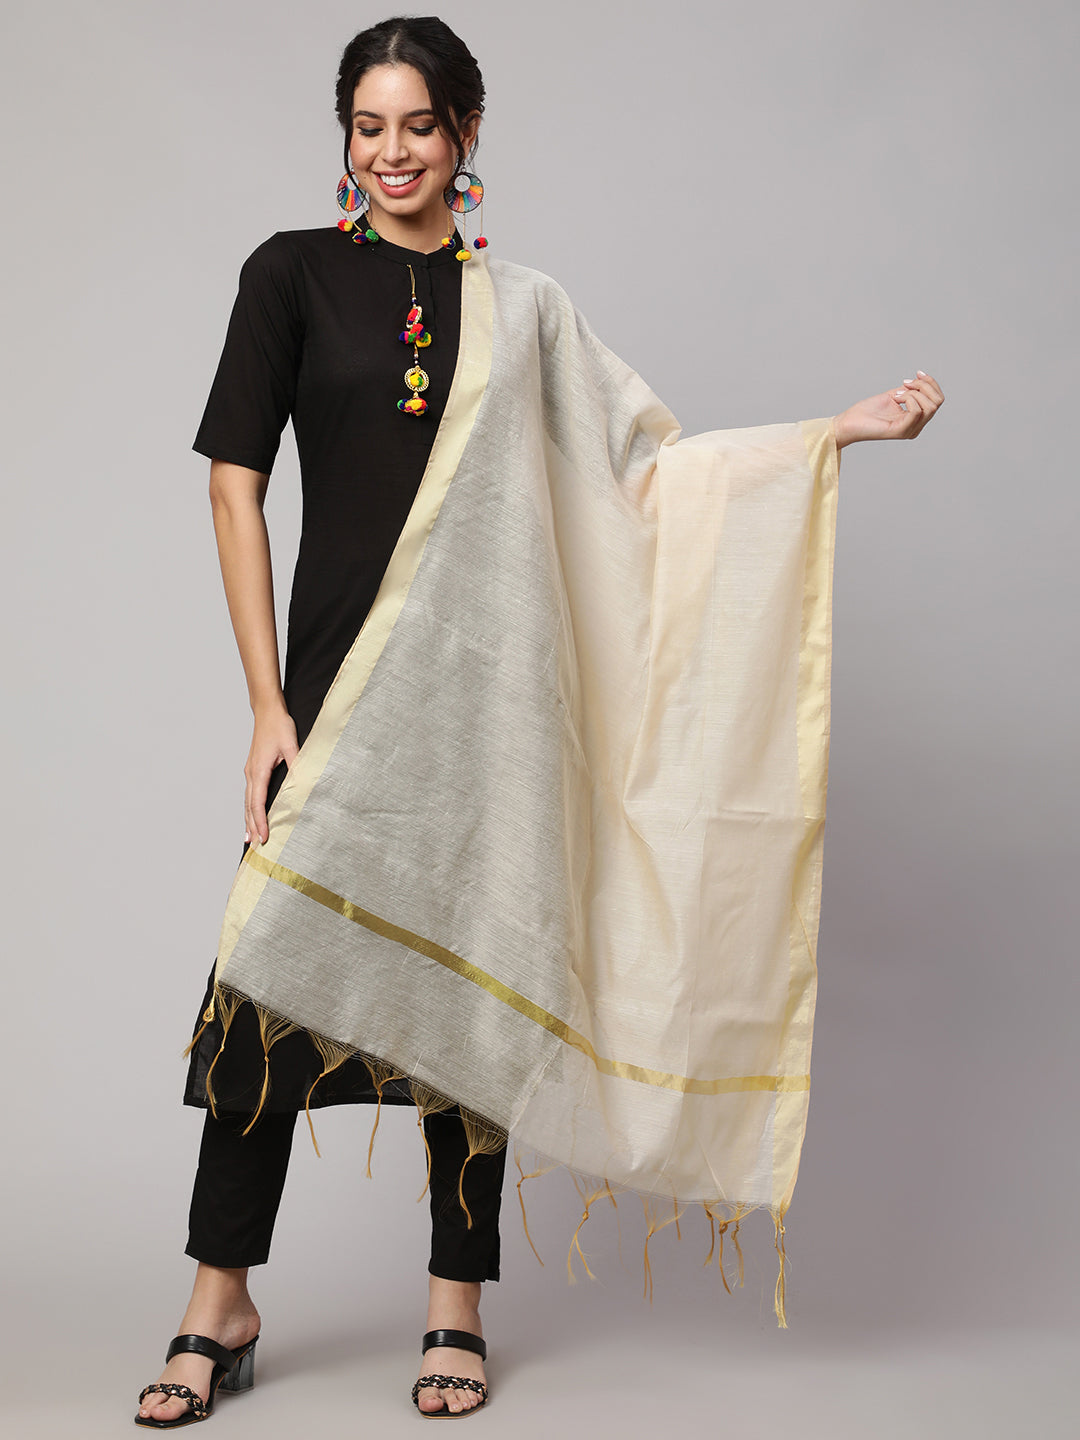 Women's Multi Printed and Solid Beige with Blue Dupatta Combo, Pack Of Three - Nayo Clothing